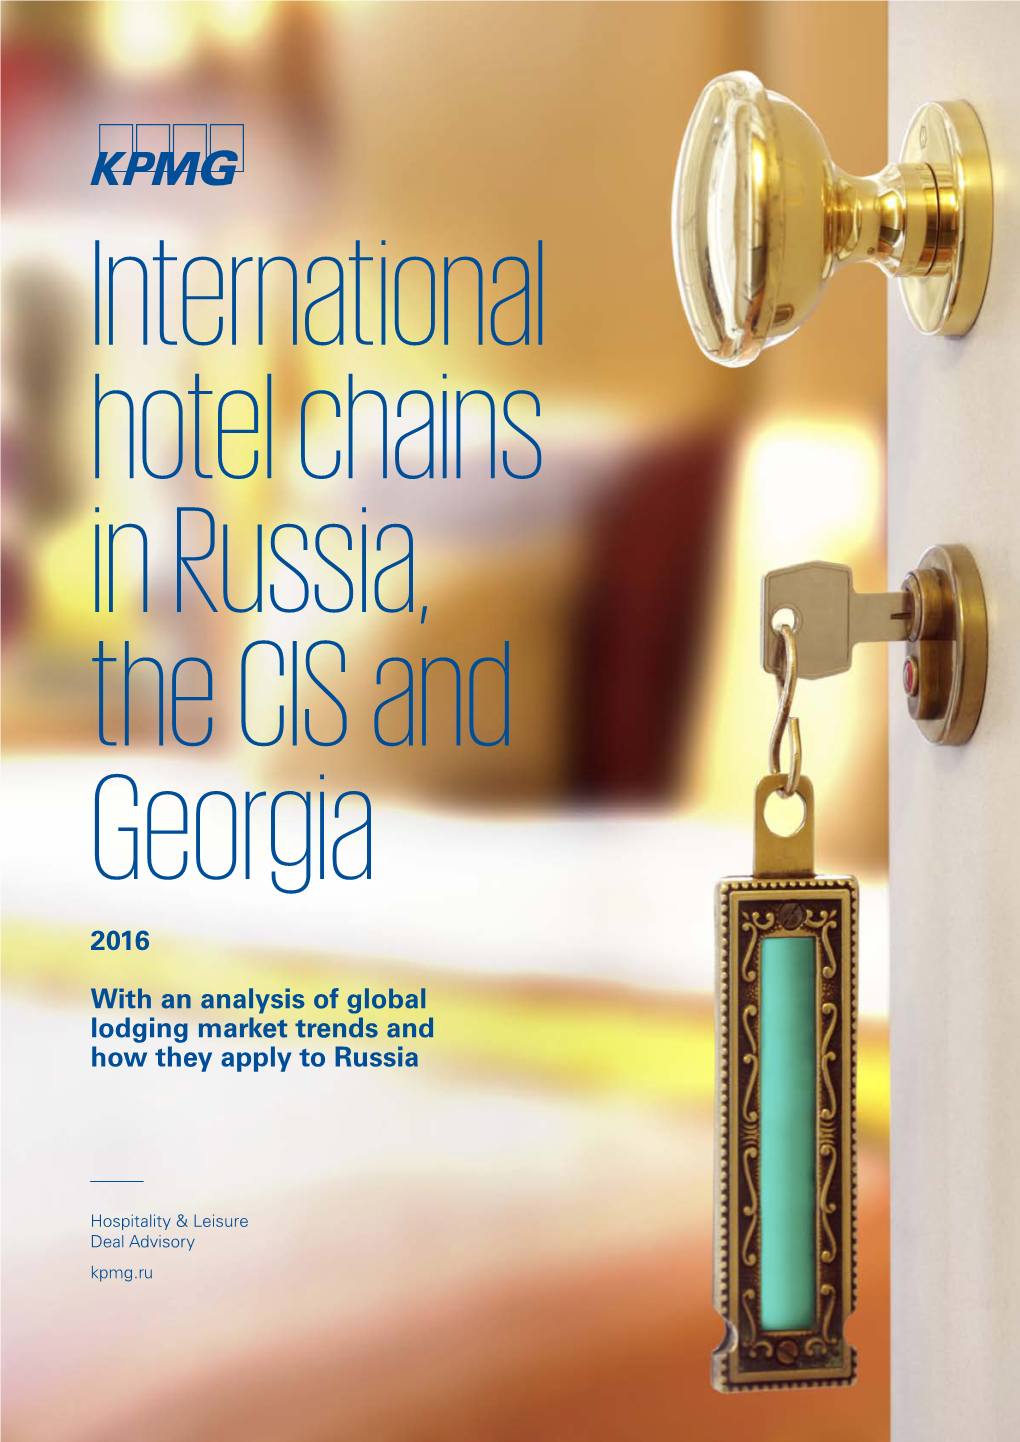 International Hotel Chains in Russia, the CIS and Georgia